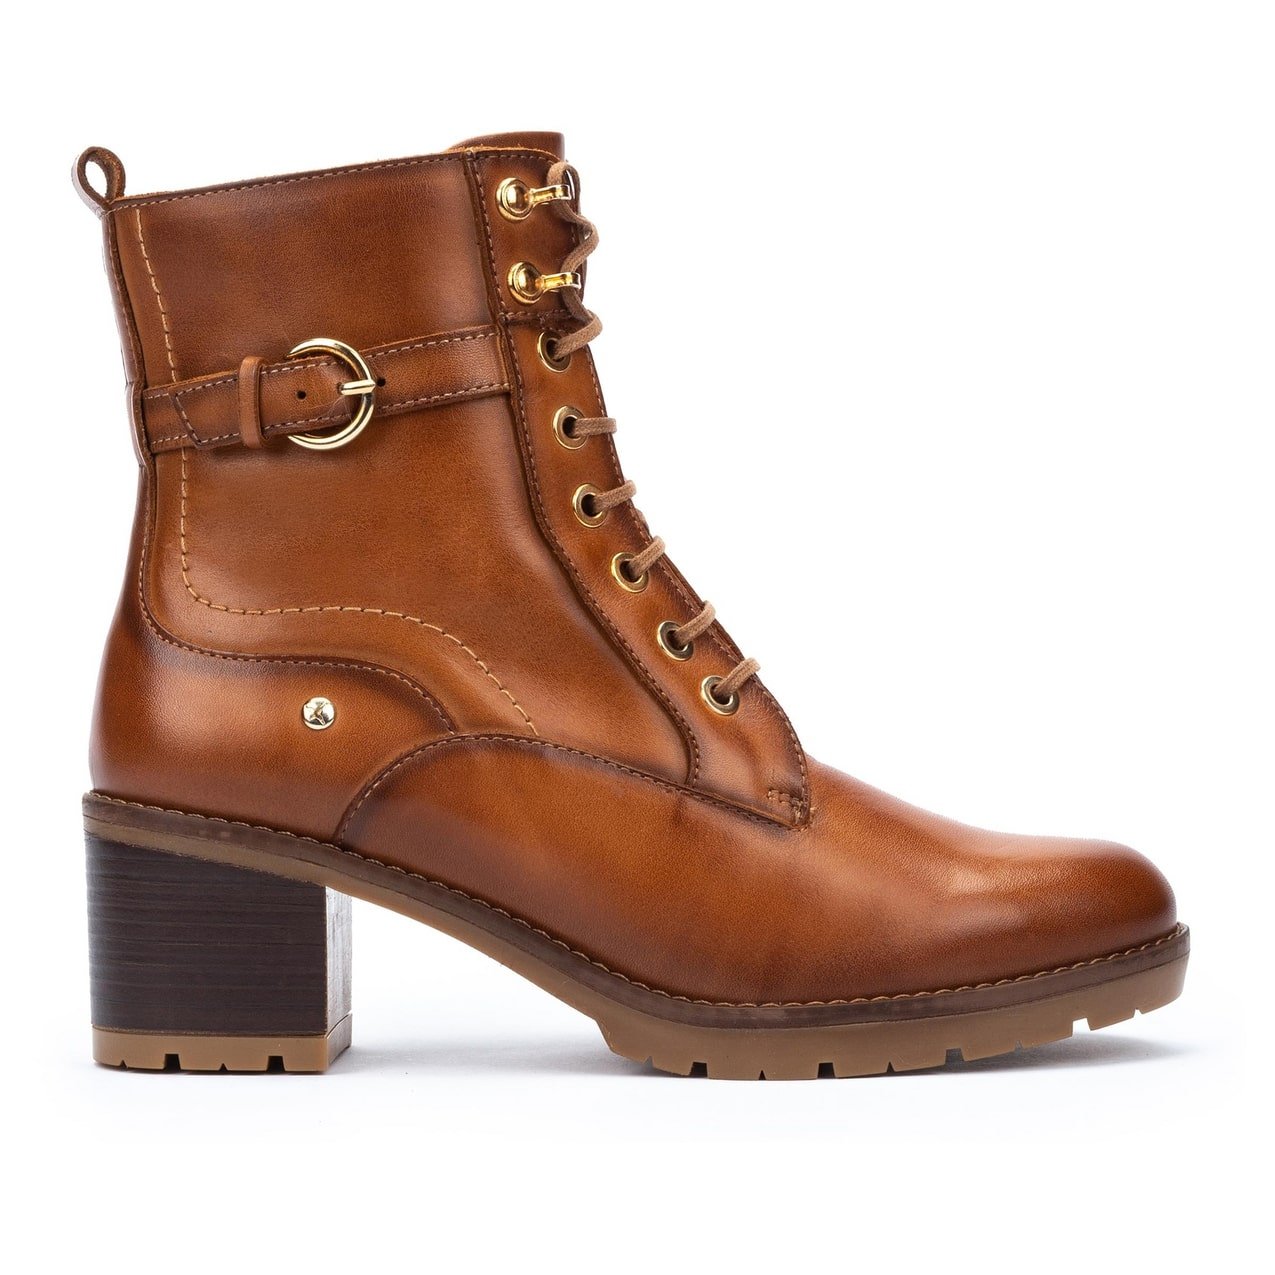 Llanes' women's brown leather boots by Pikolinos